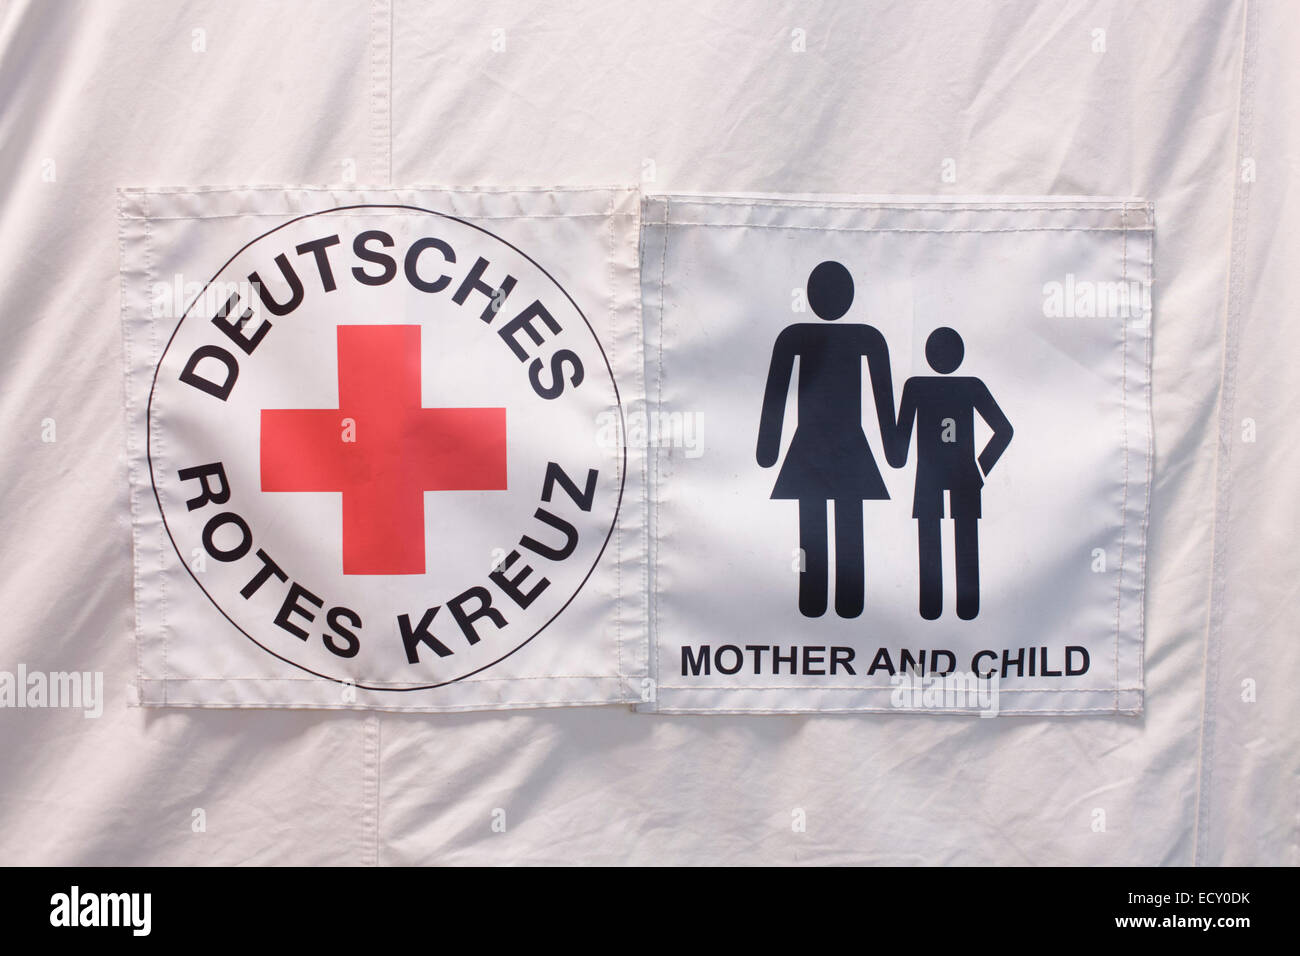 Tents in emergency supplies warehouse, Deutsches Rotes Kreuz (DRK - German Red Cross) at their logistics centre Stock Photo